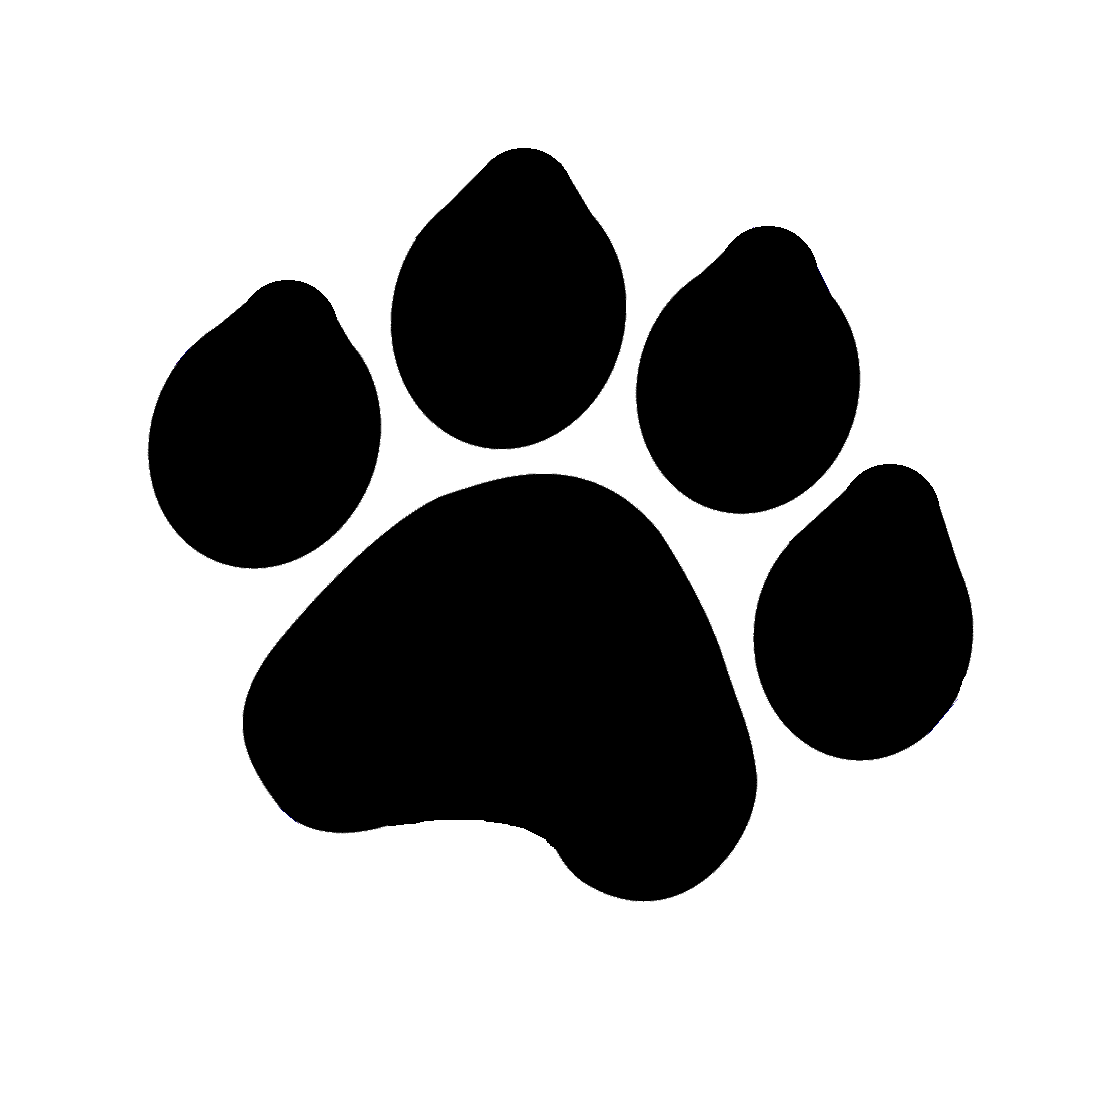 Tiger Paw Prints Clip Art - Clipart library